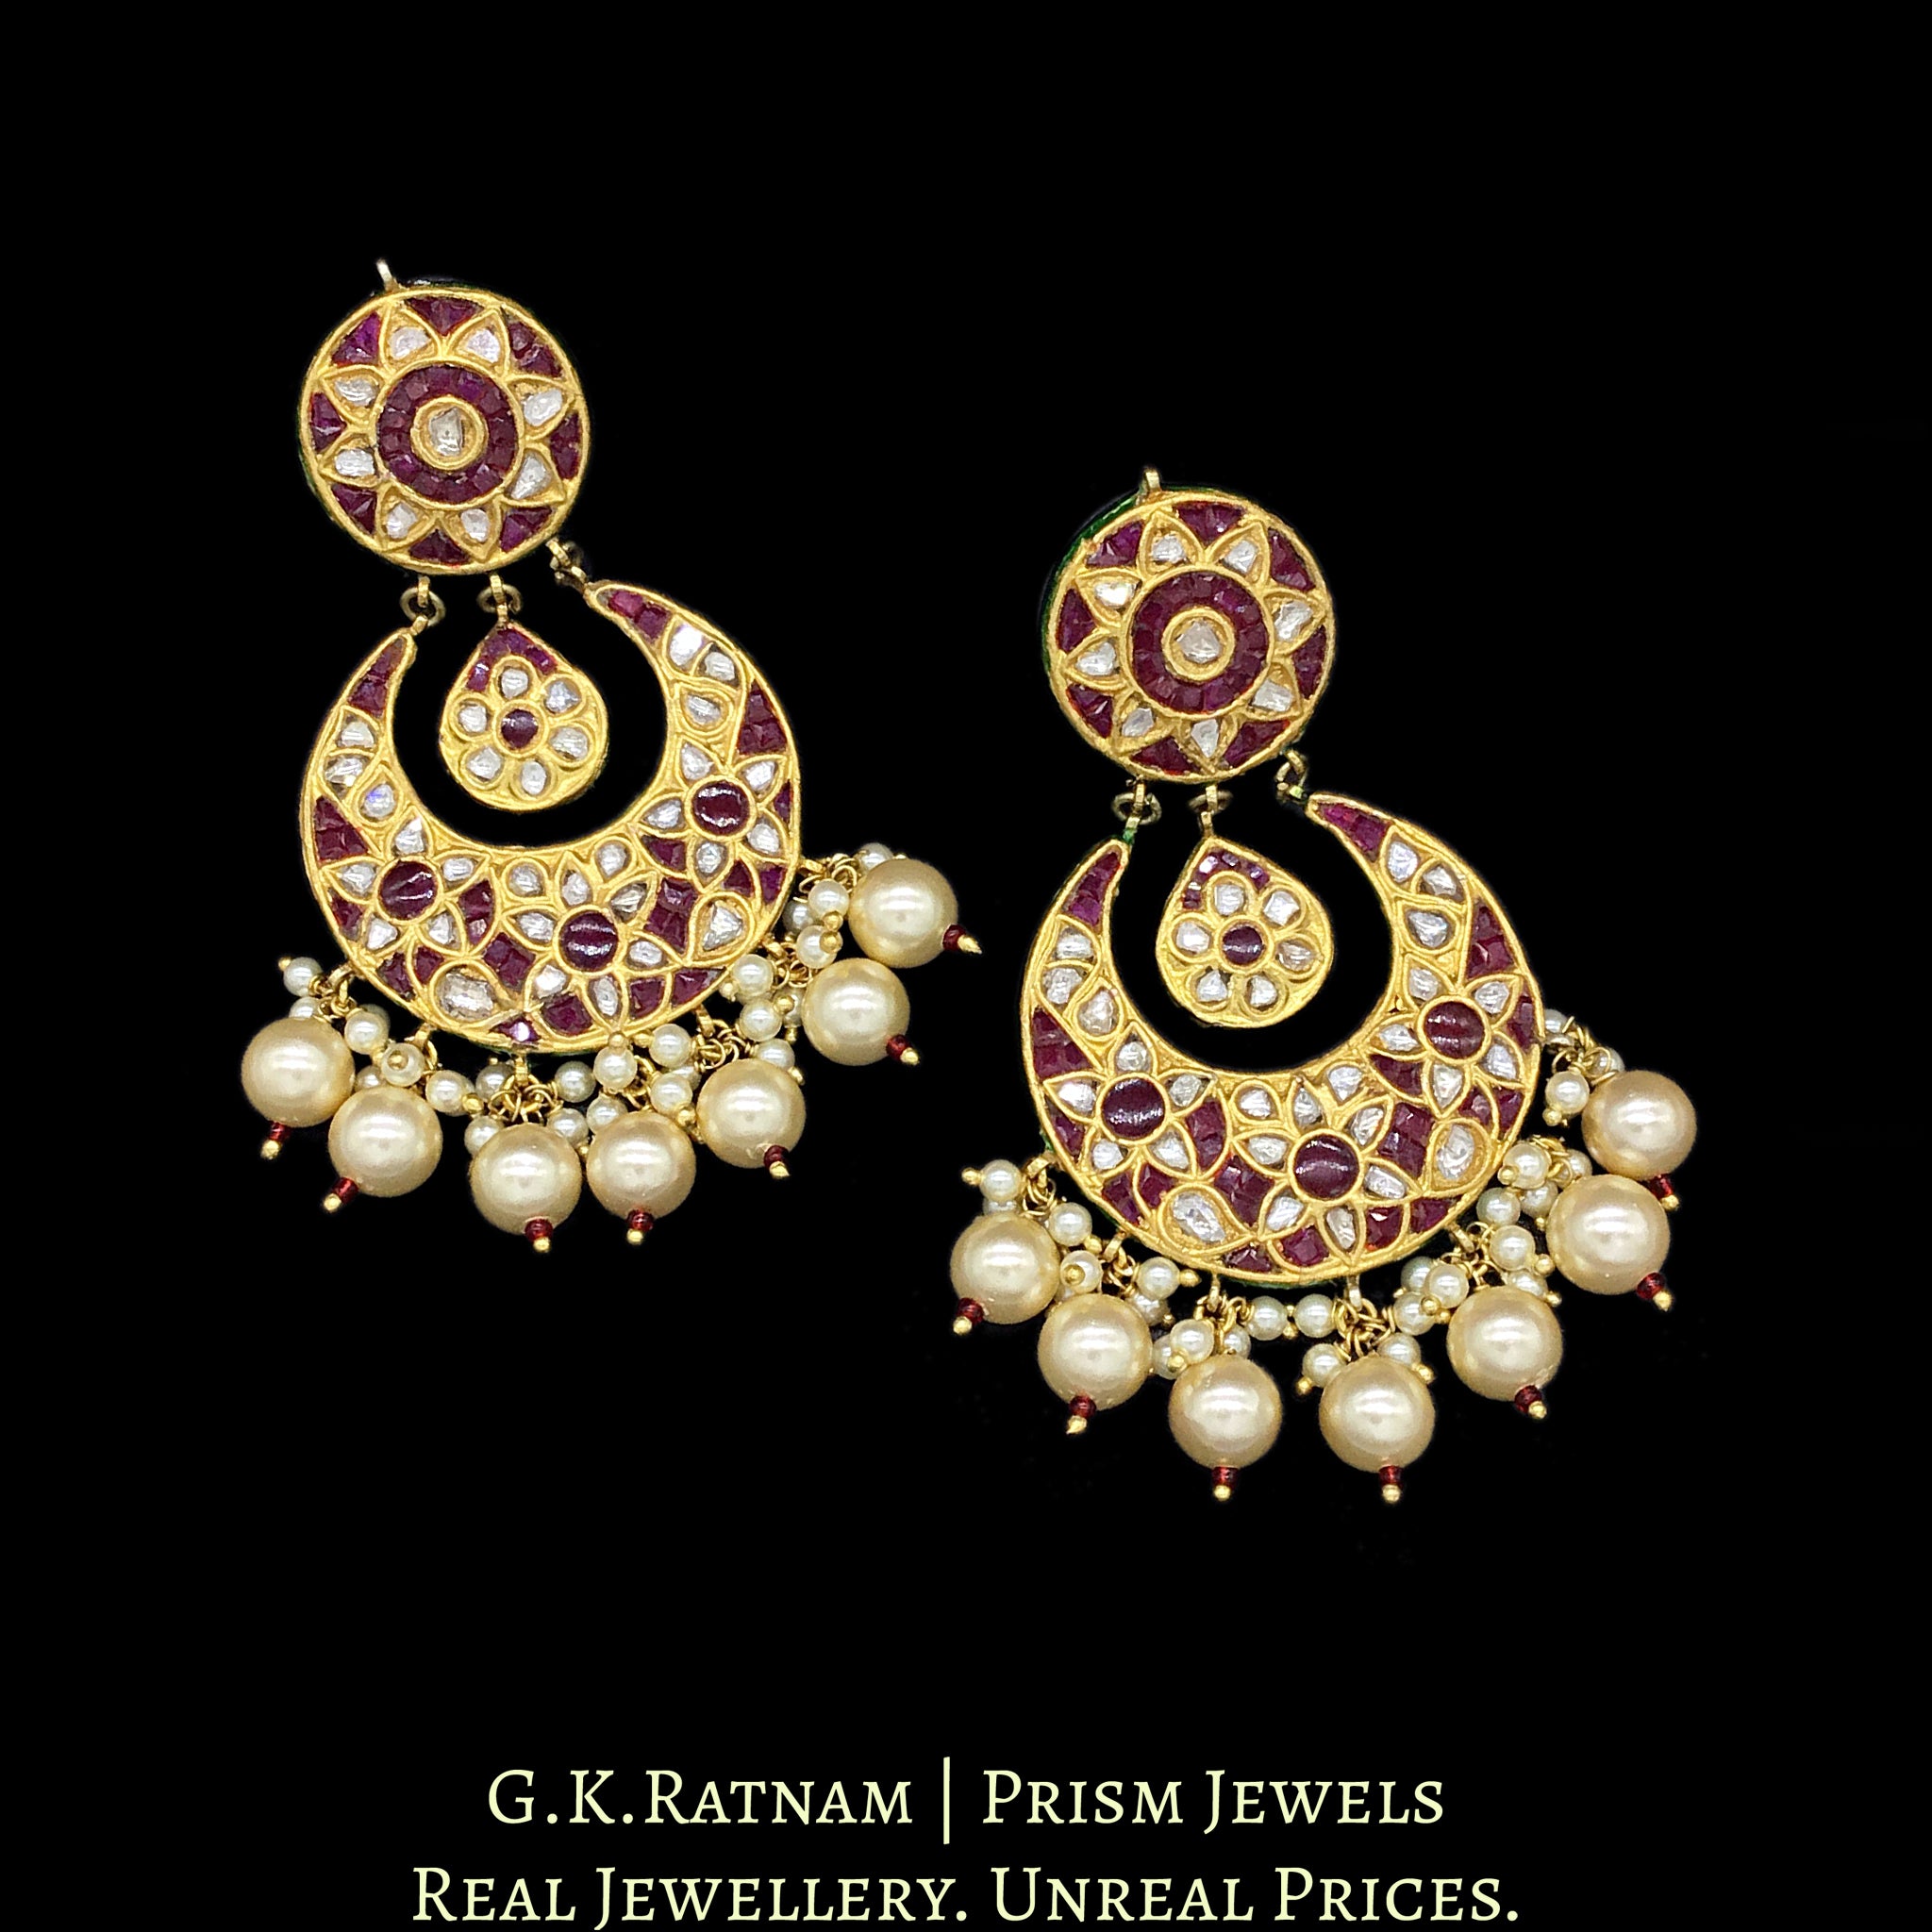 23k Gold and Diamond Polki Chand Bali Earring Pair set with rubies and enhanced with pearls - G. K. Ratnam